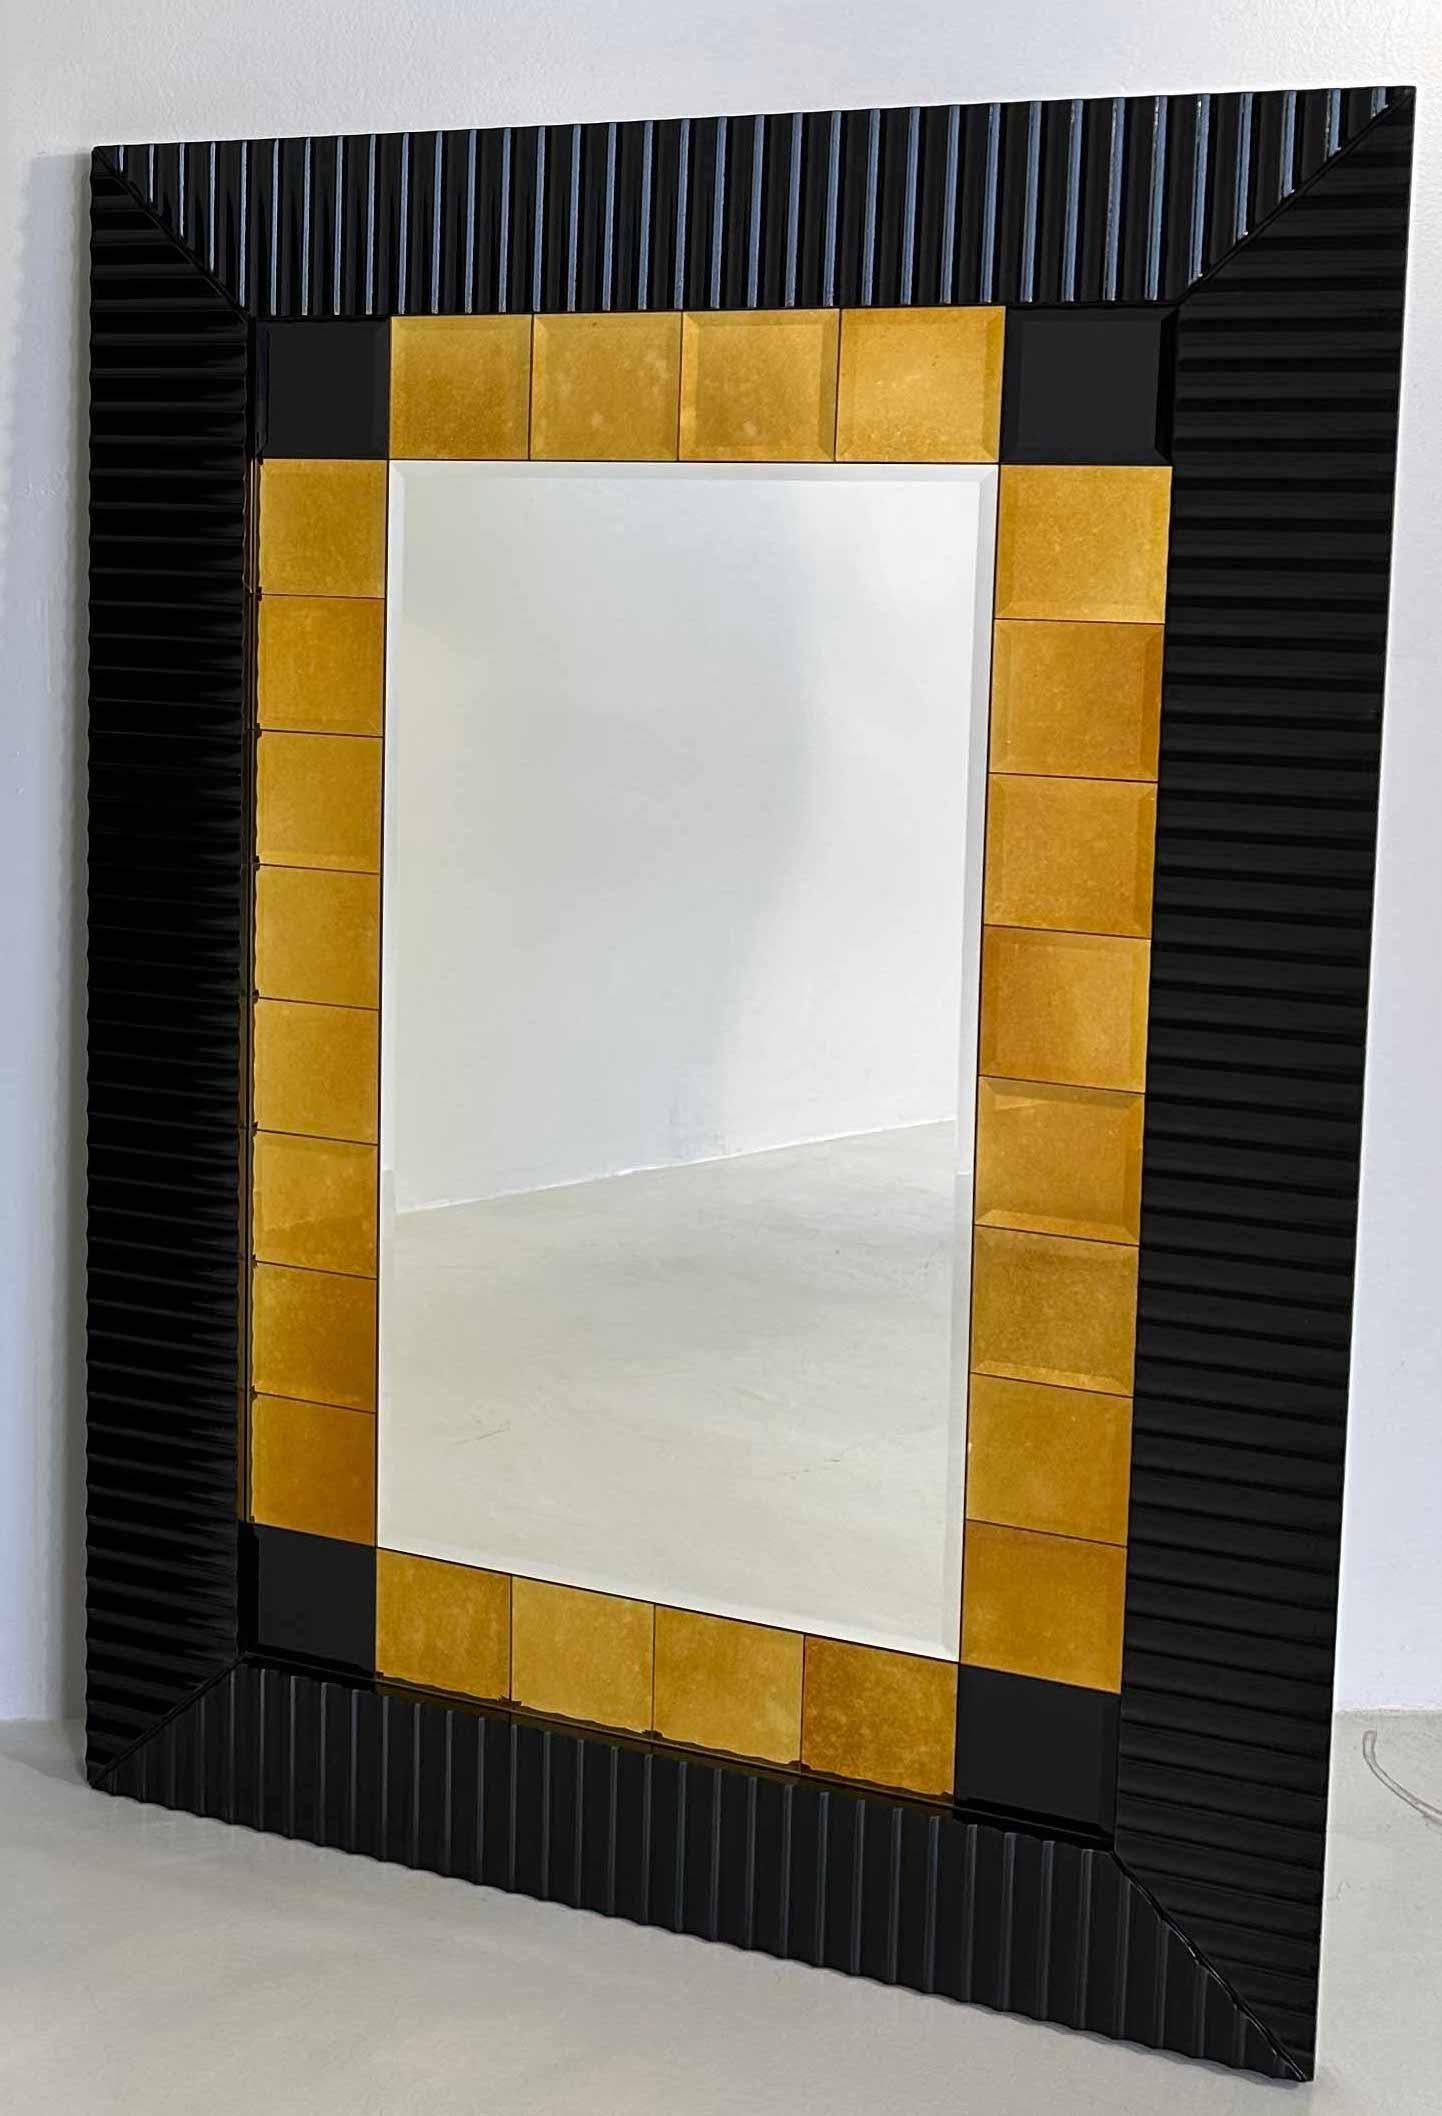 This mirror was produced in Italy in the 1980s. 
The frame is in black lacquered worked wood, the internal frame is composed by 4 black squared glasses and 24 gold squared mirrors. All the glasses and mirrors are bevelled.